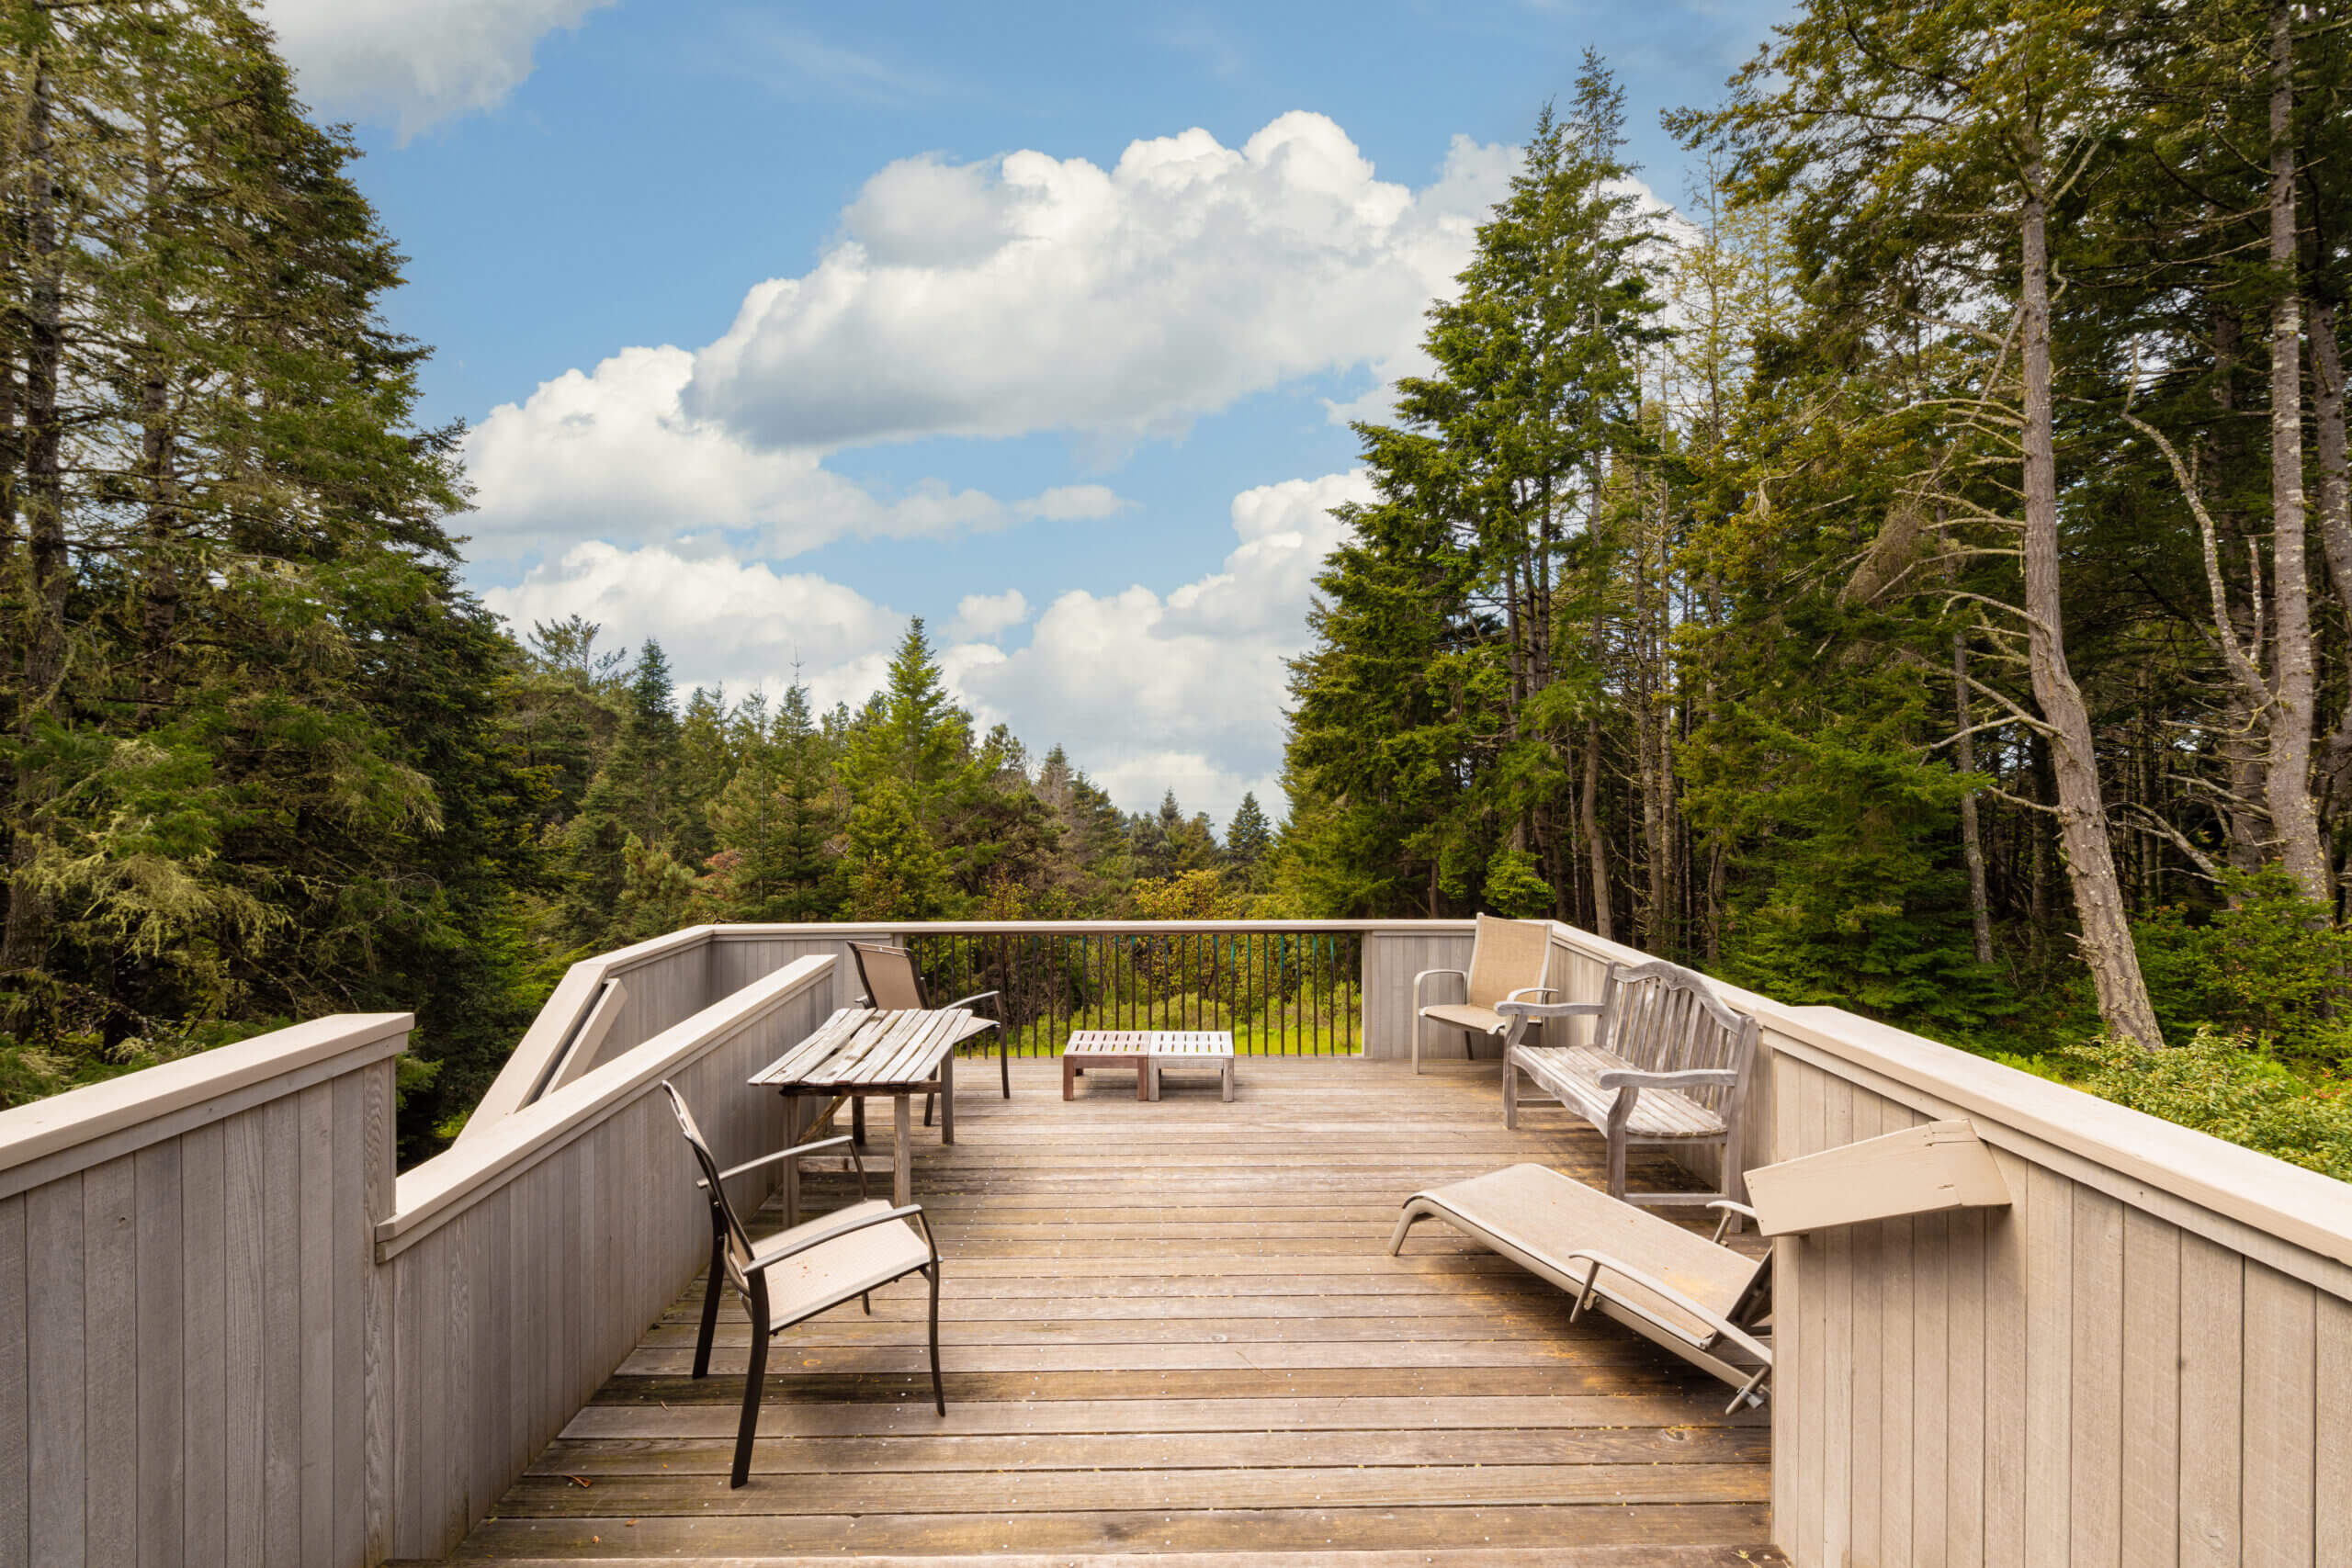 Sea Ridge deck with chairs and view of pine trees and blue sky